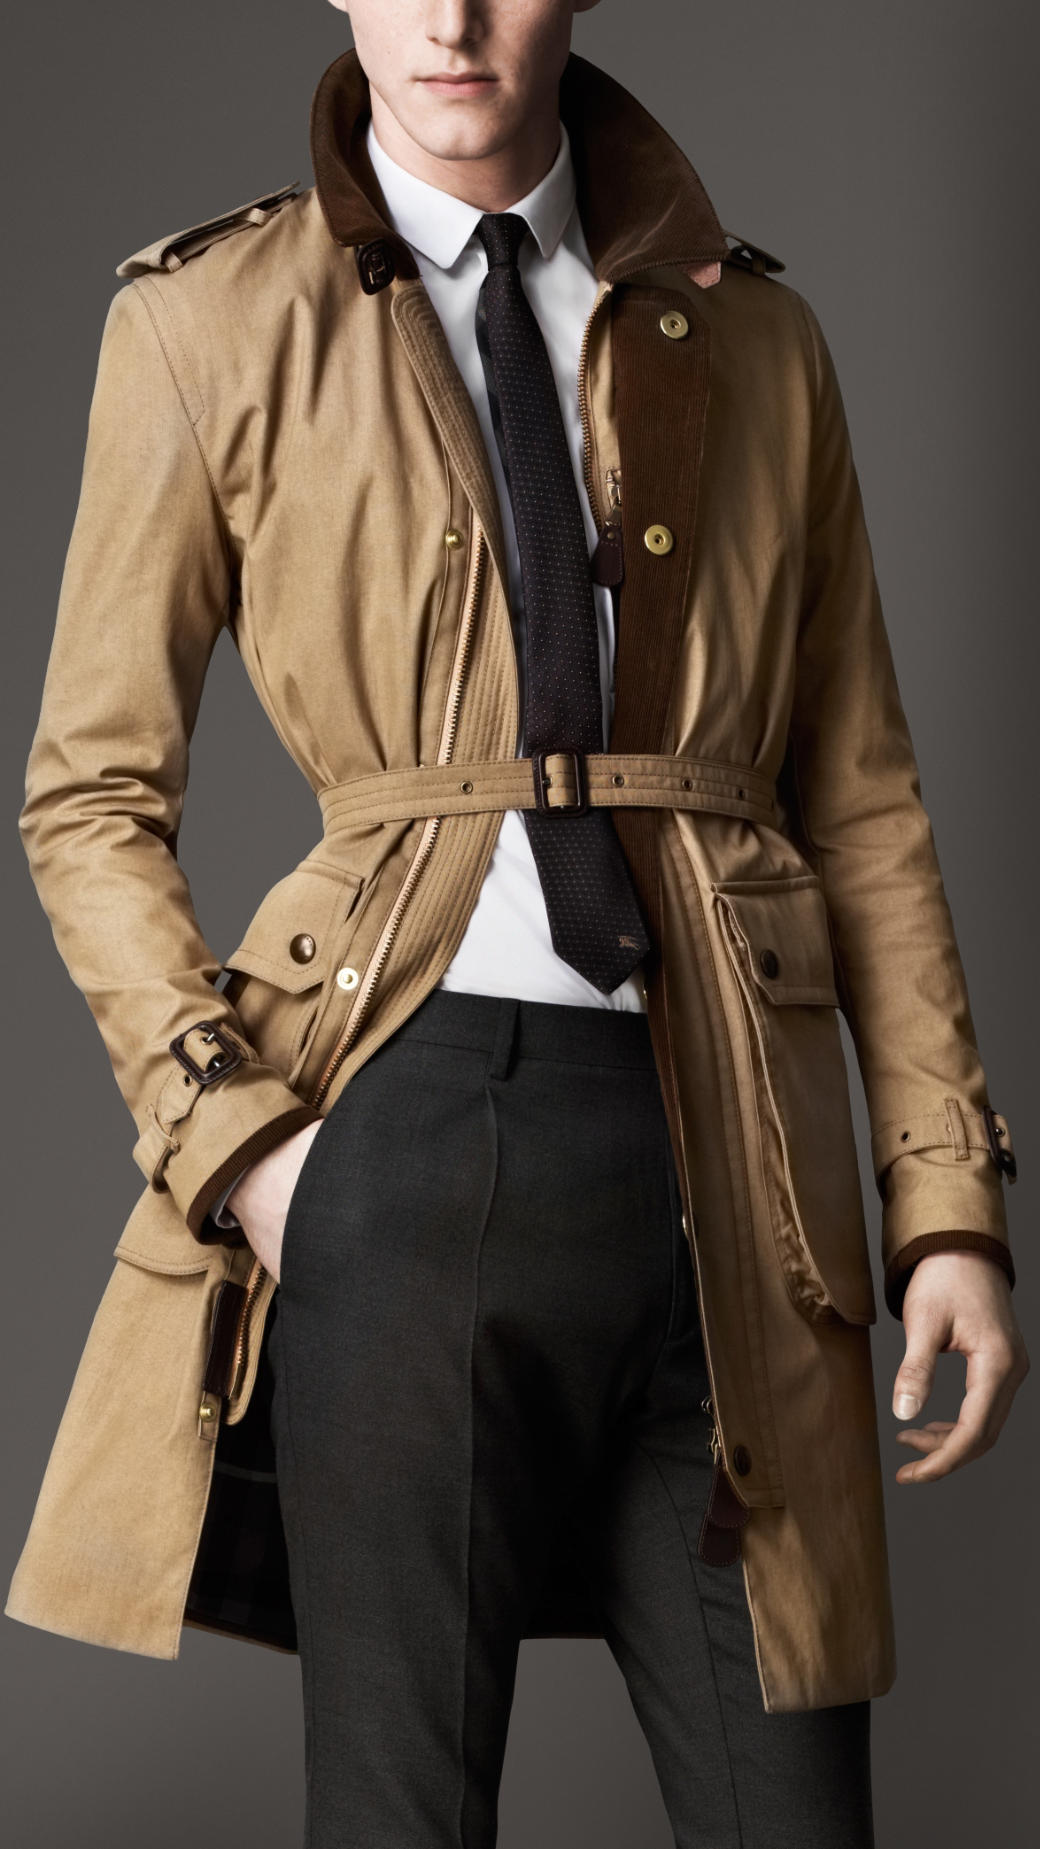 Burberry Waxed Cotton Canvas Car Coat in Natural for Men - Lyst